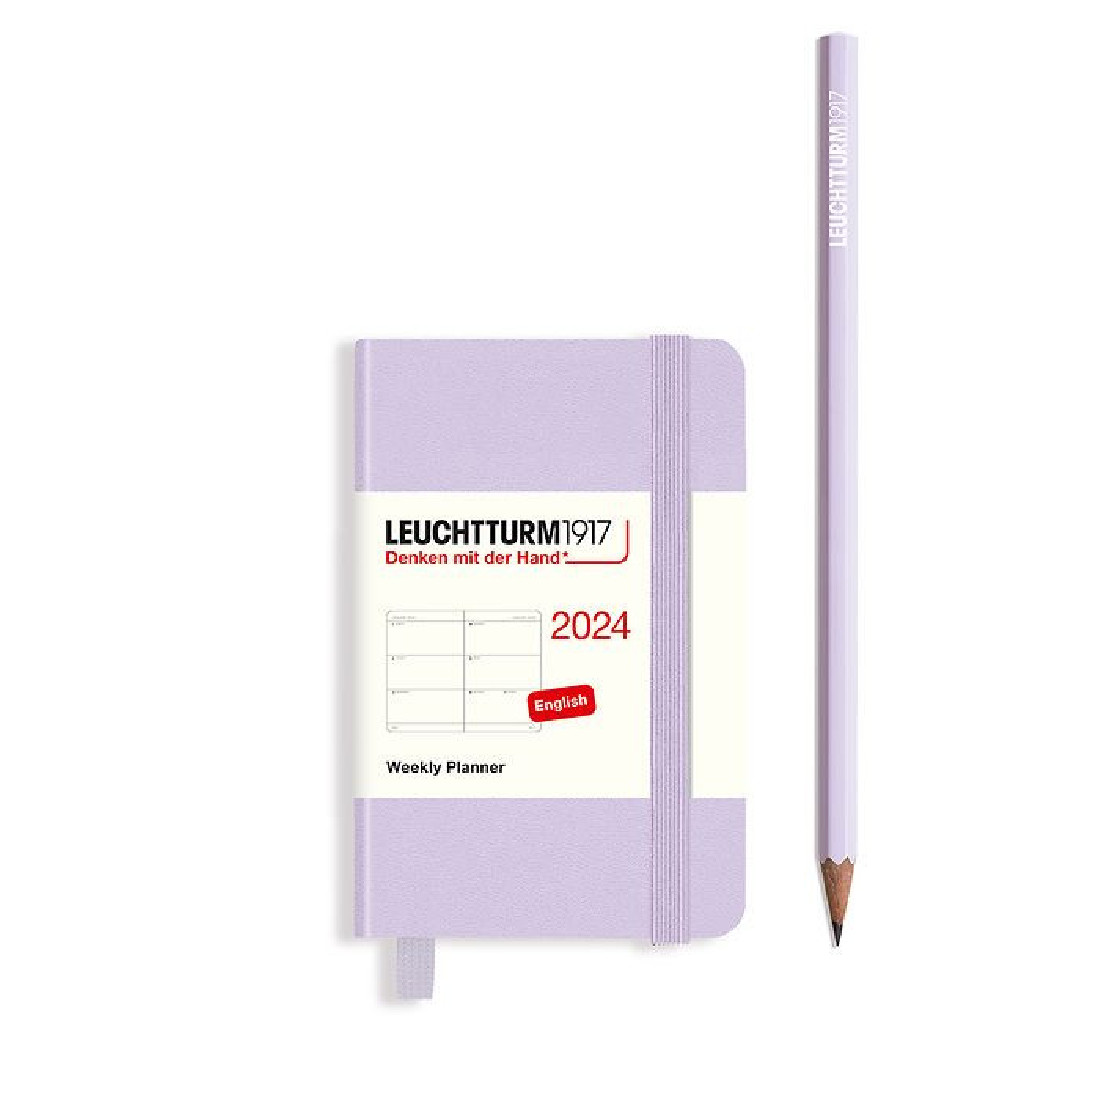 Leuchtturm 1917 Weekly Planner 2024 Lilac Mini A7 Hard Cover